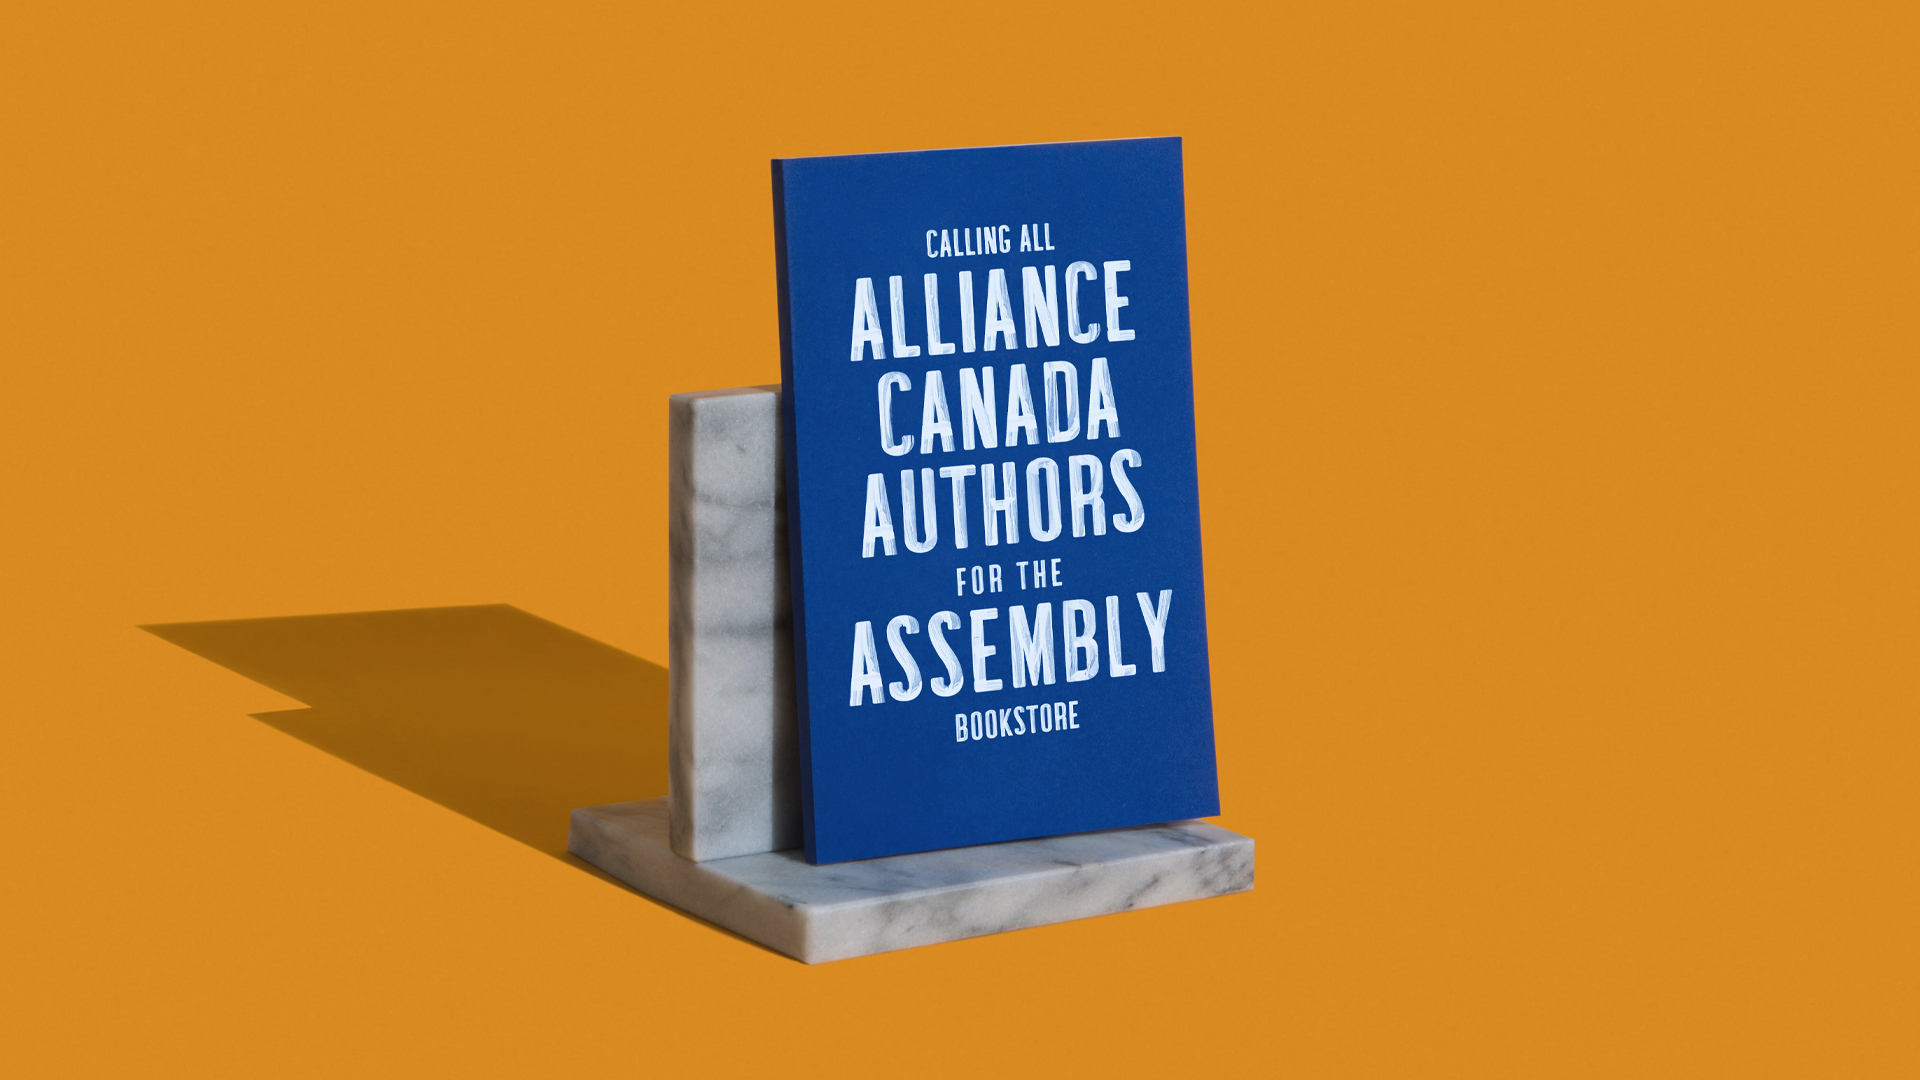 Call for Canadian Alliance Authors